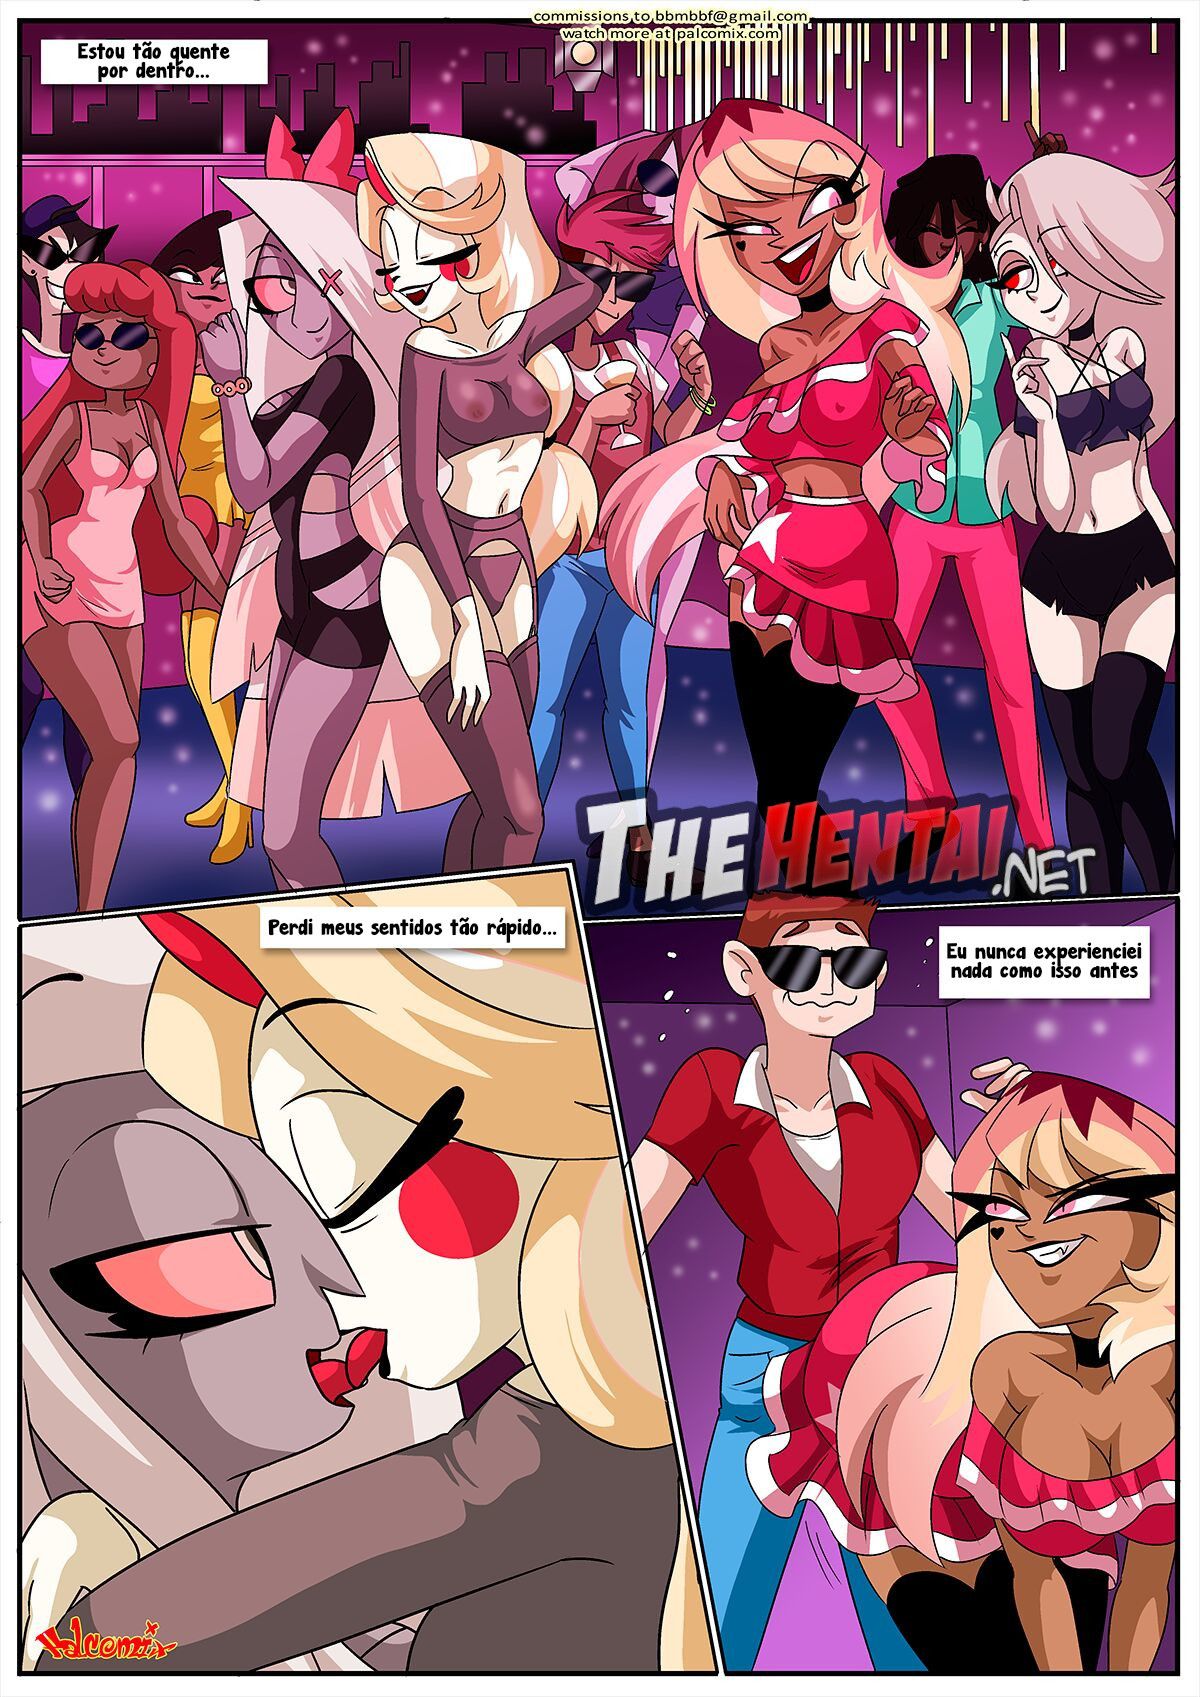 Hell Of A Night Hentai pt-br 04